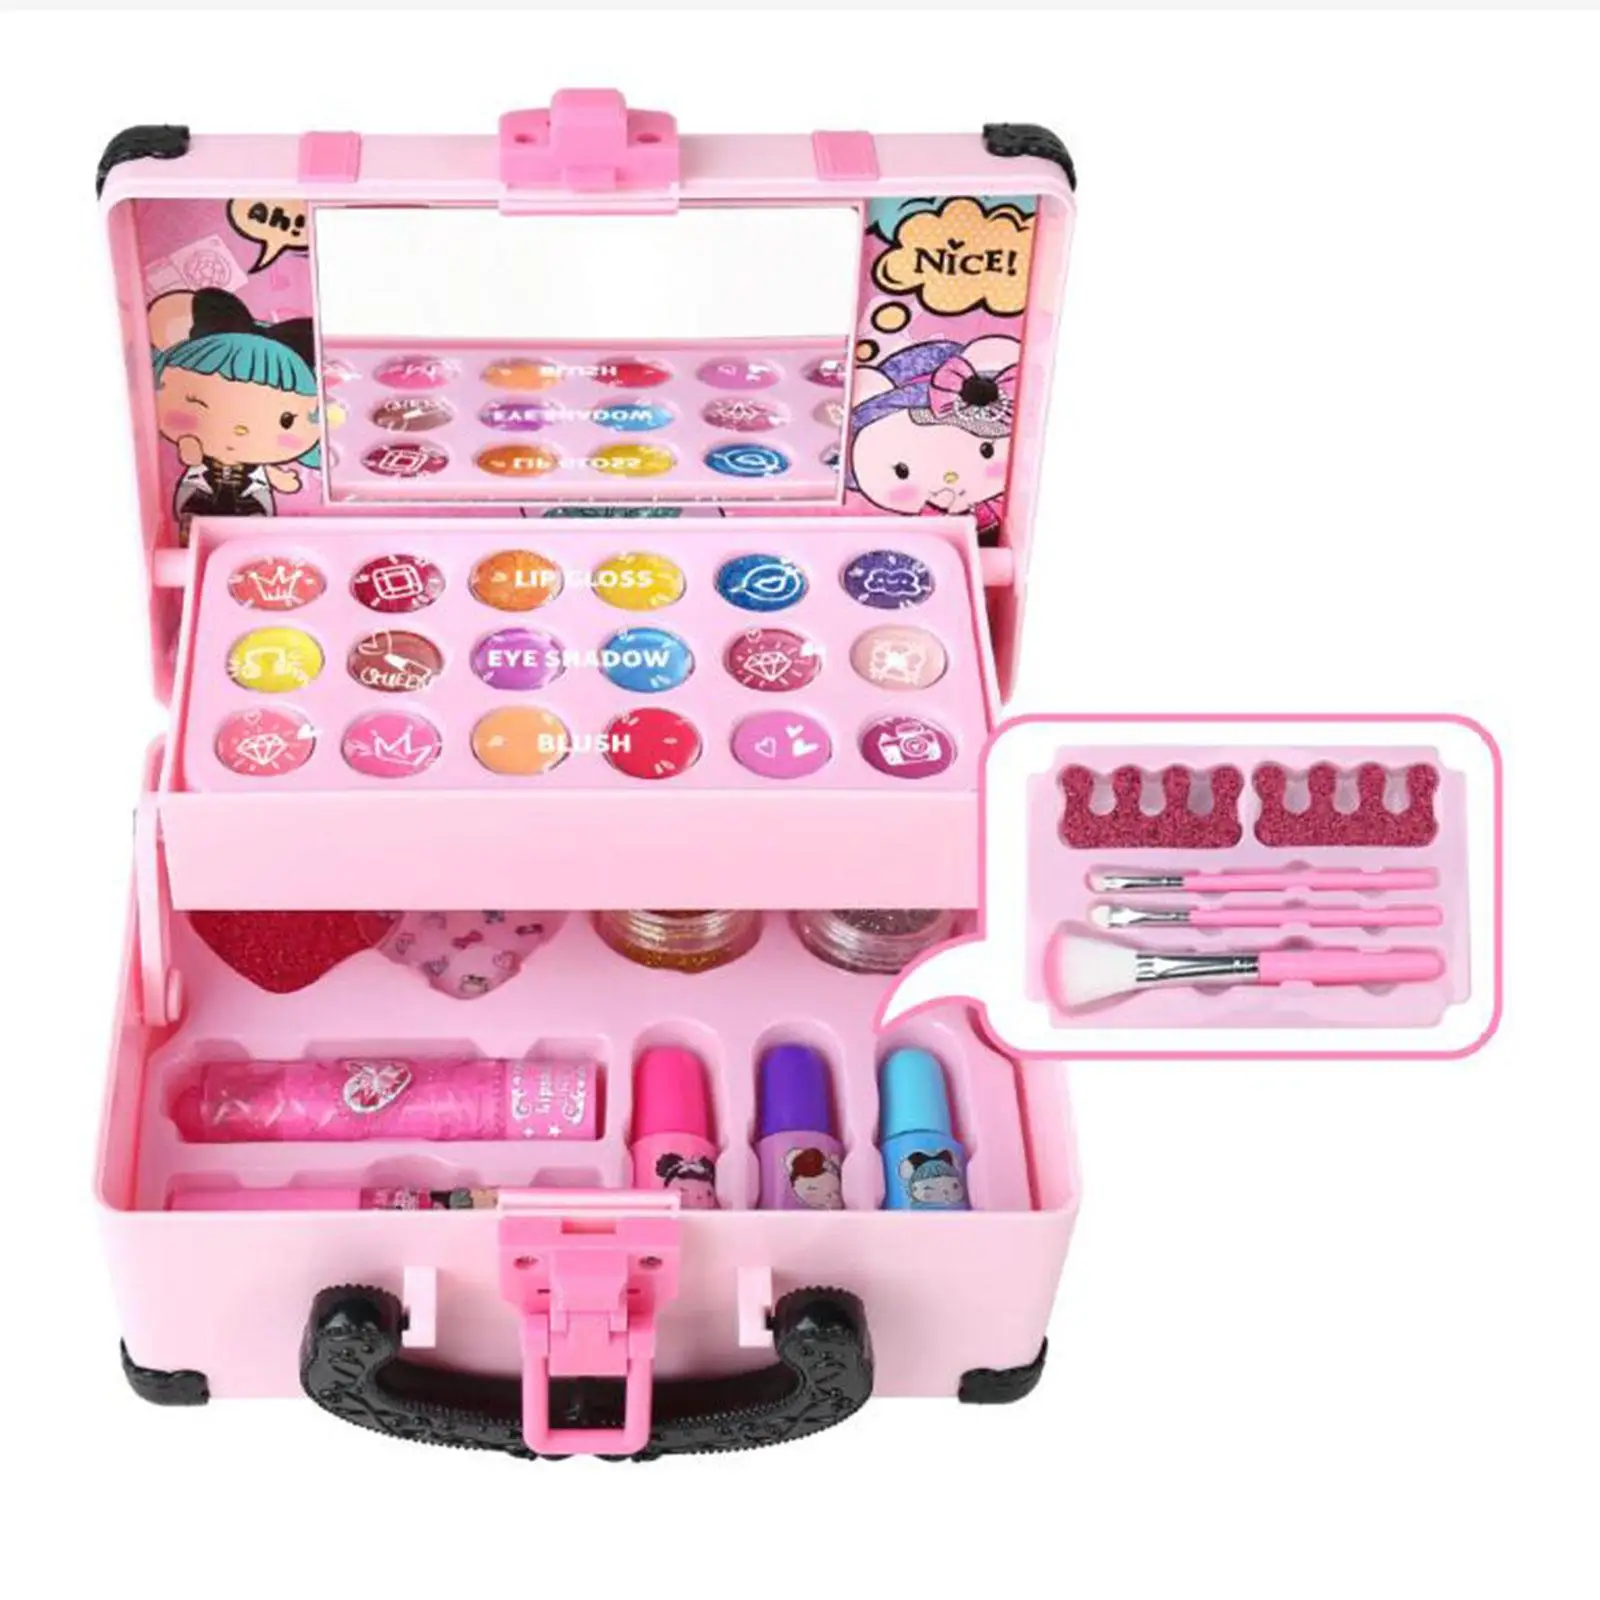 Pretend Play Makeup Toy Set Pretend Makeup Accessories Children Makeup Playing Box for Toddlers Children Girls Birthday Gifts